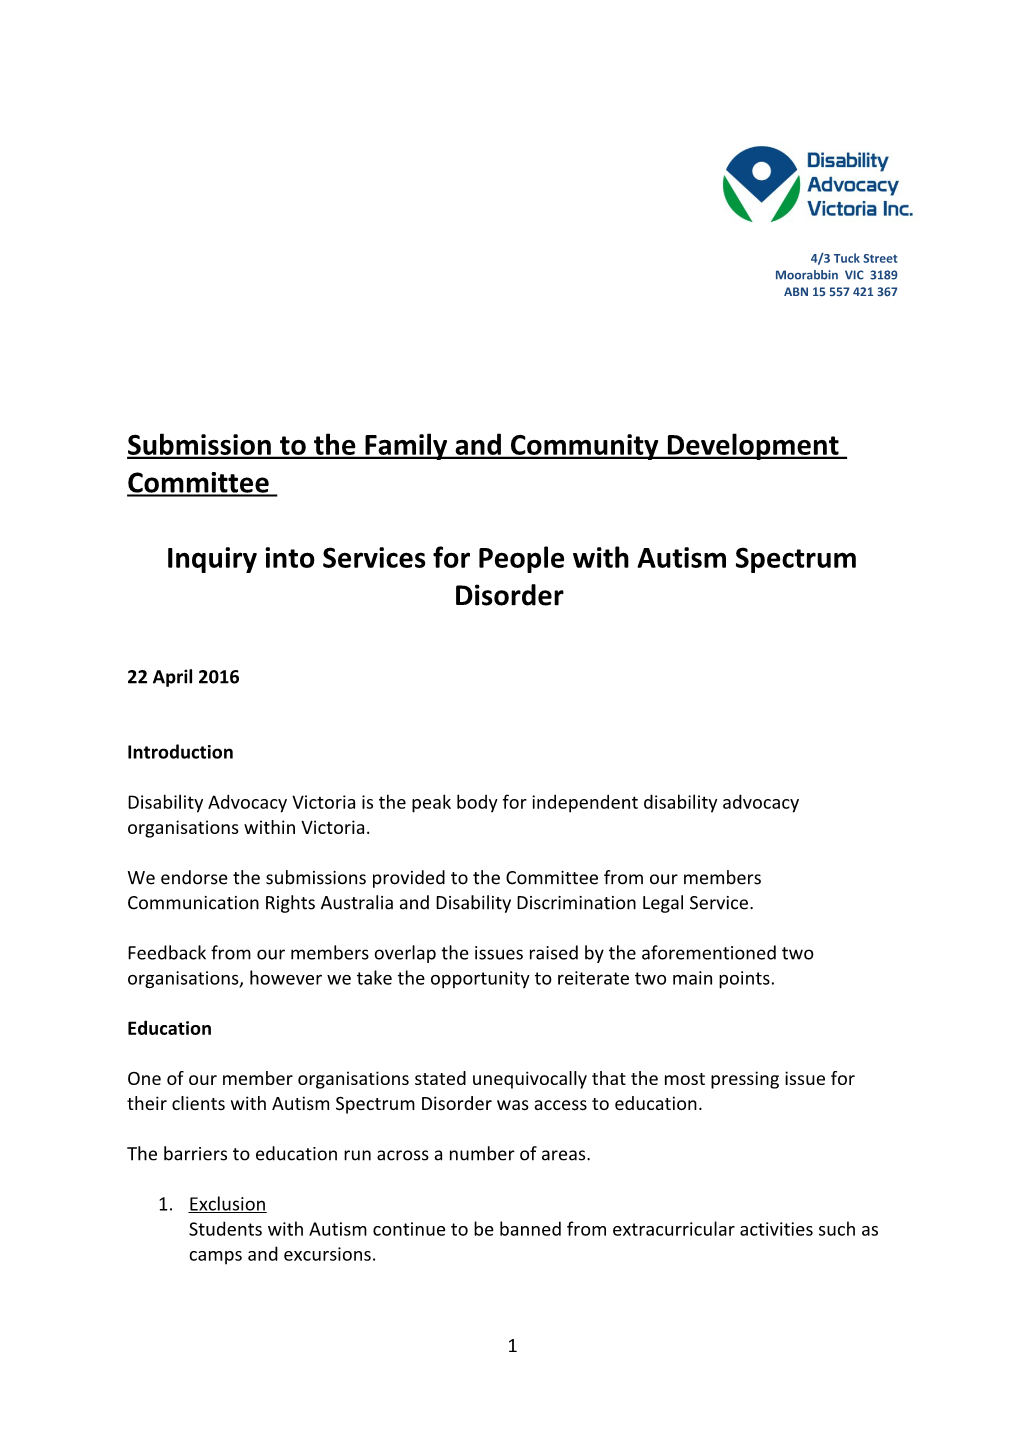 Submission to the Family and Community Development Committee